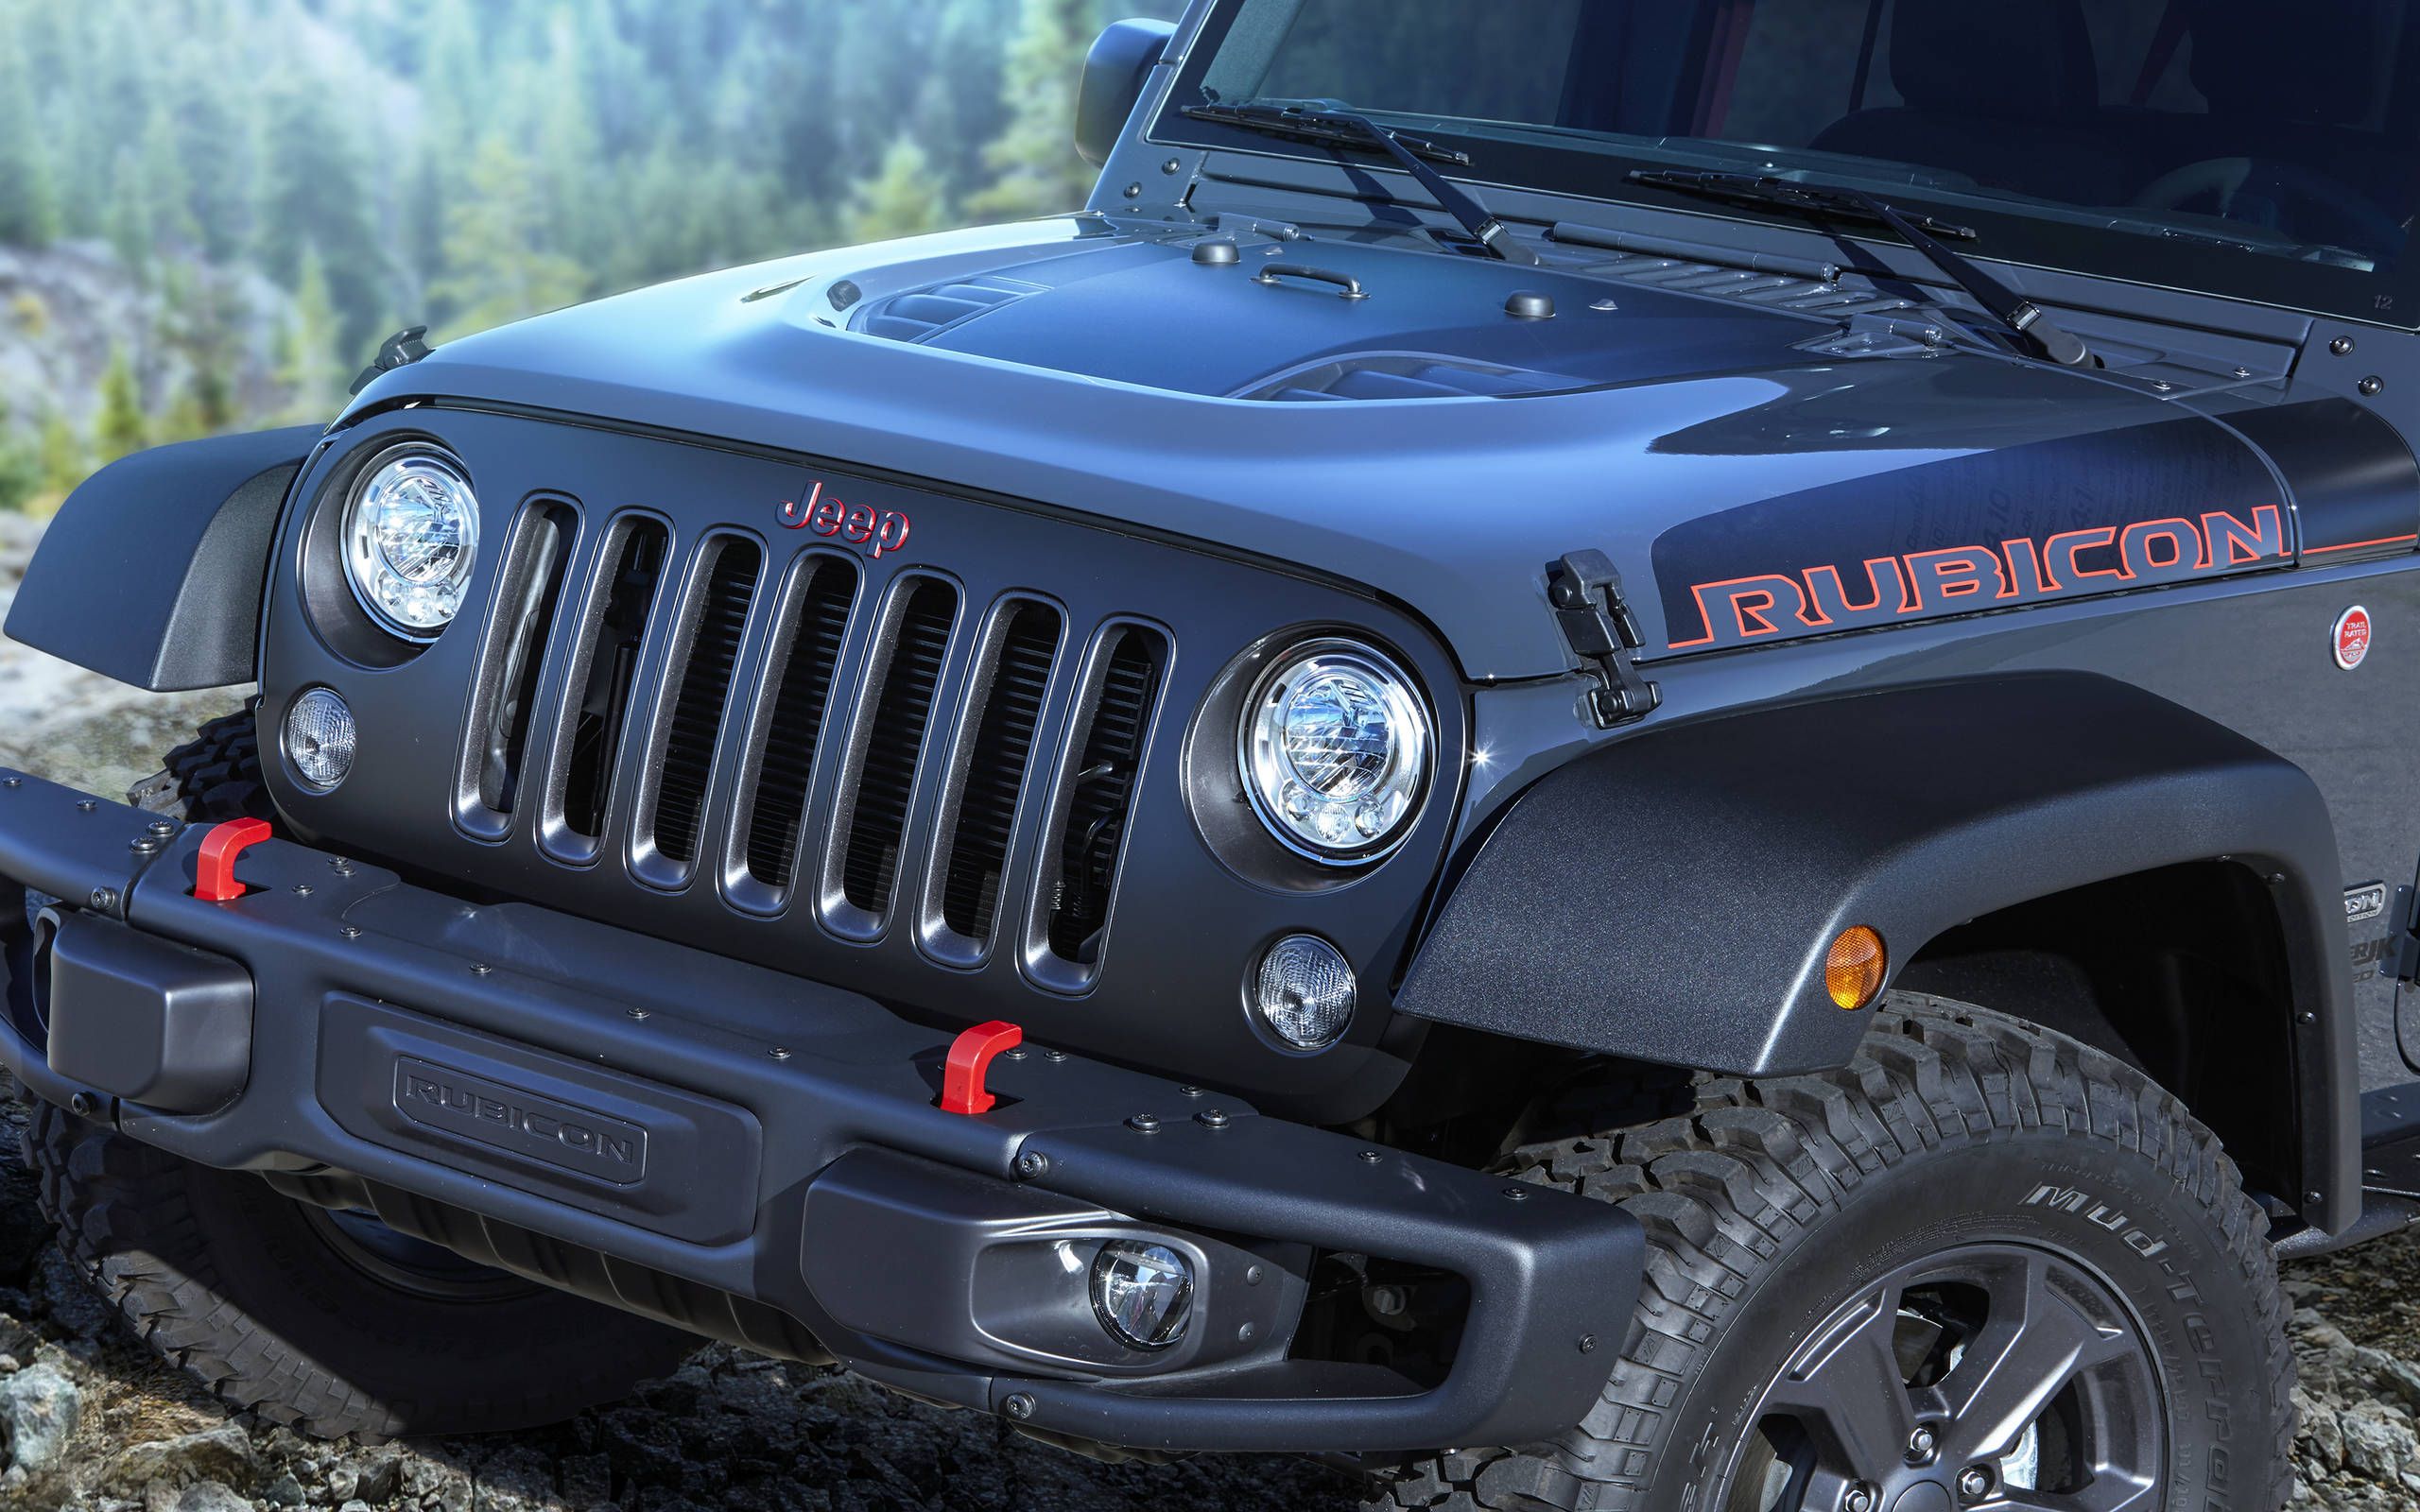 10 things we know about the 2018 Jeep Wrangler